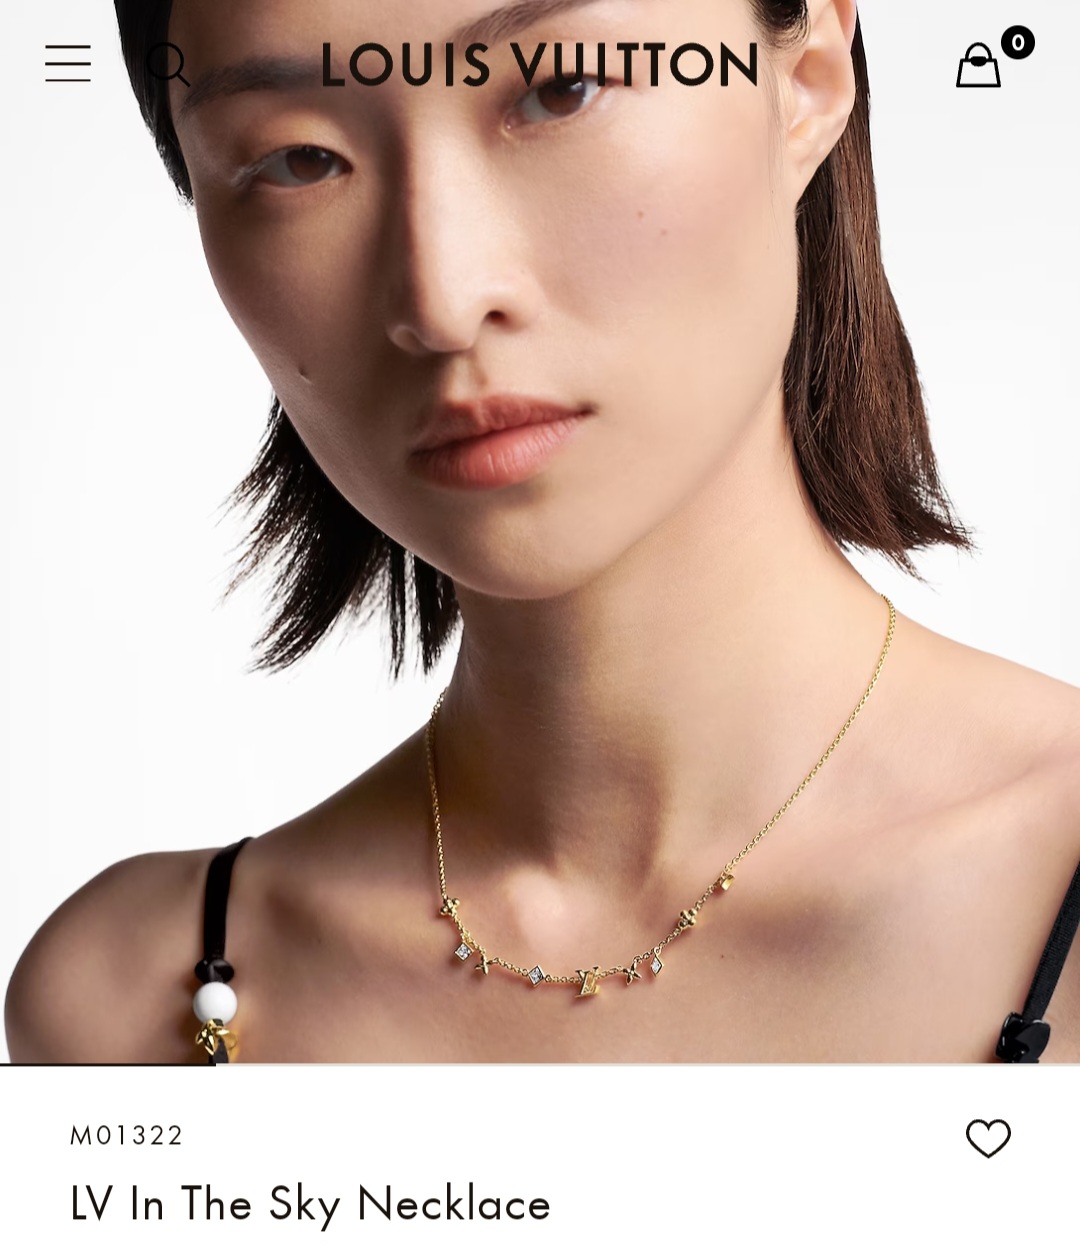 LV In The Sky necklace